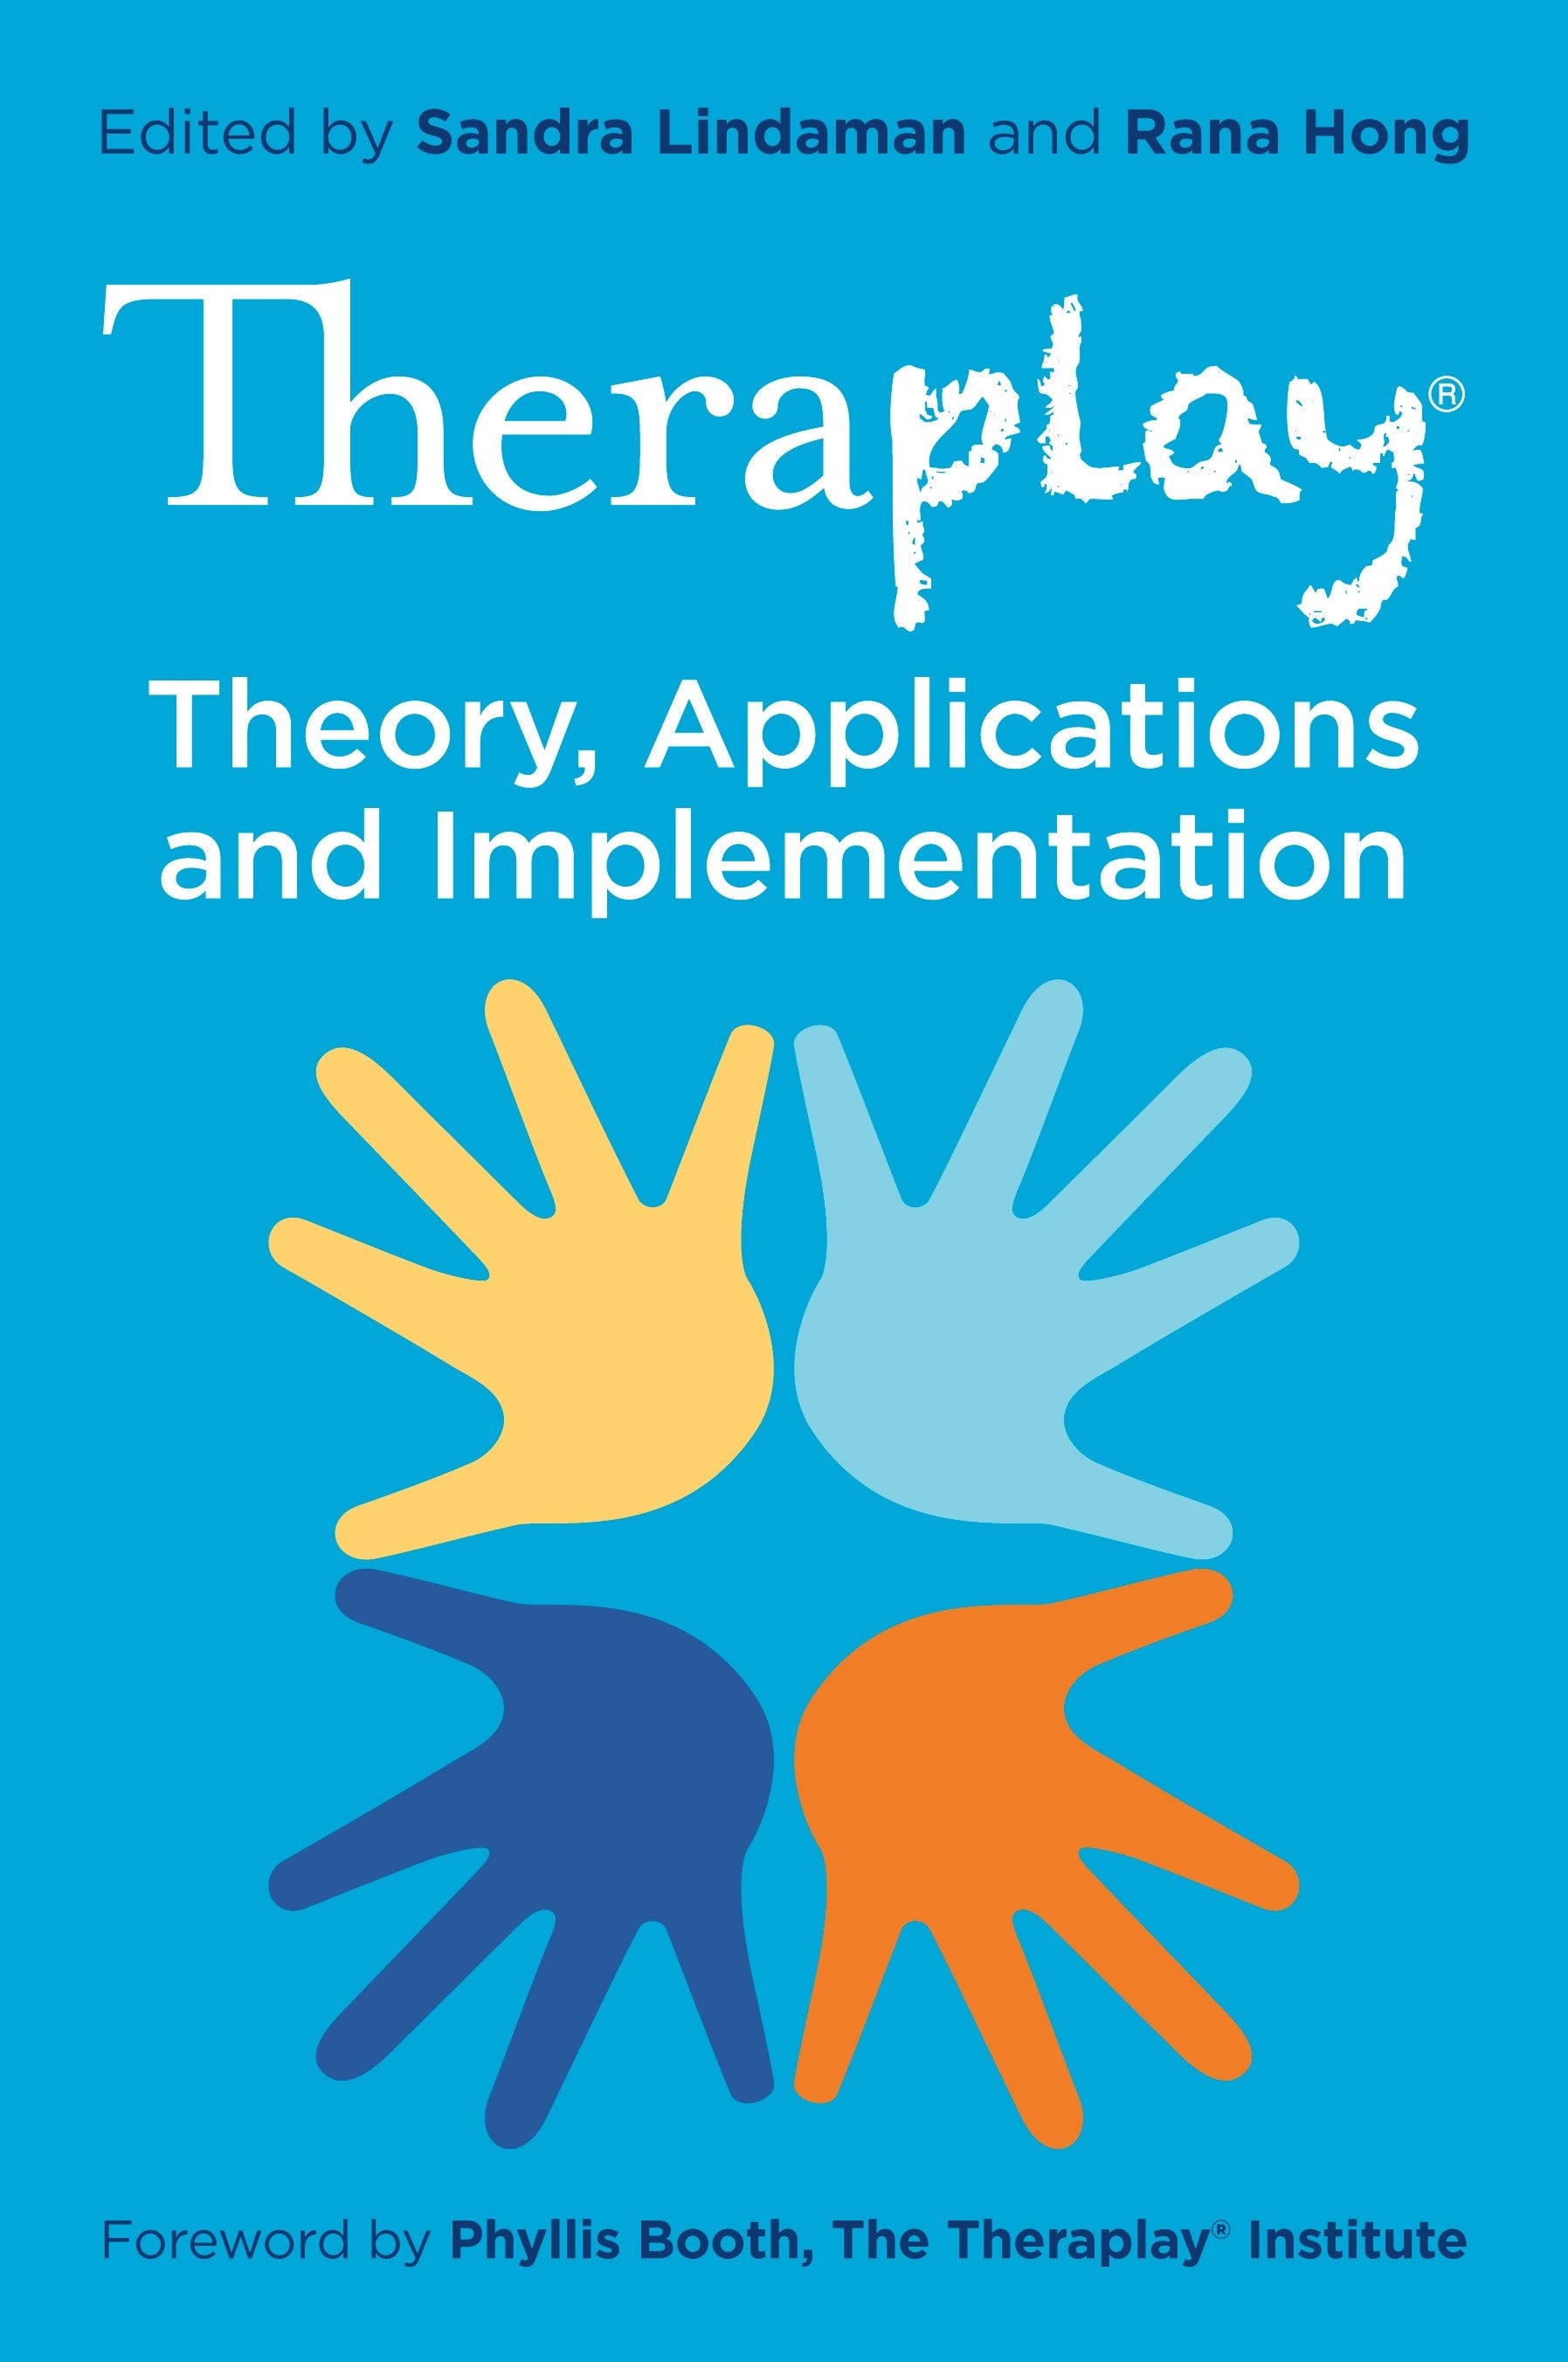 Theraplay® – Theory, Applications and Implementation by Rana Hong, Sandra Lindaman, No Author Listed, Phyllis Booth